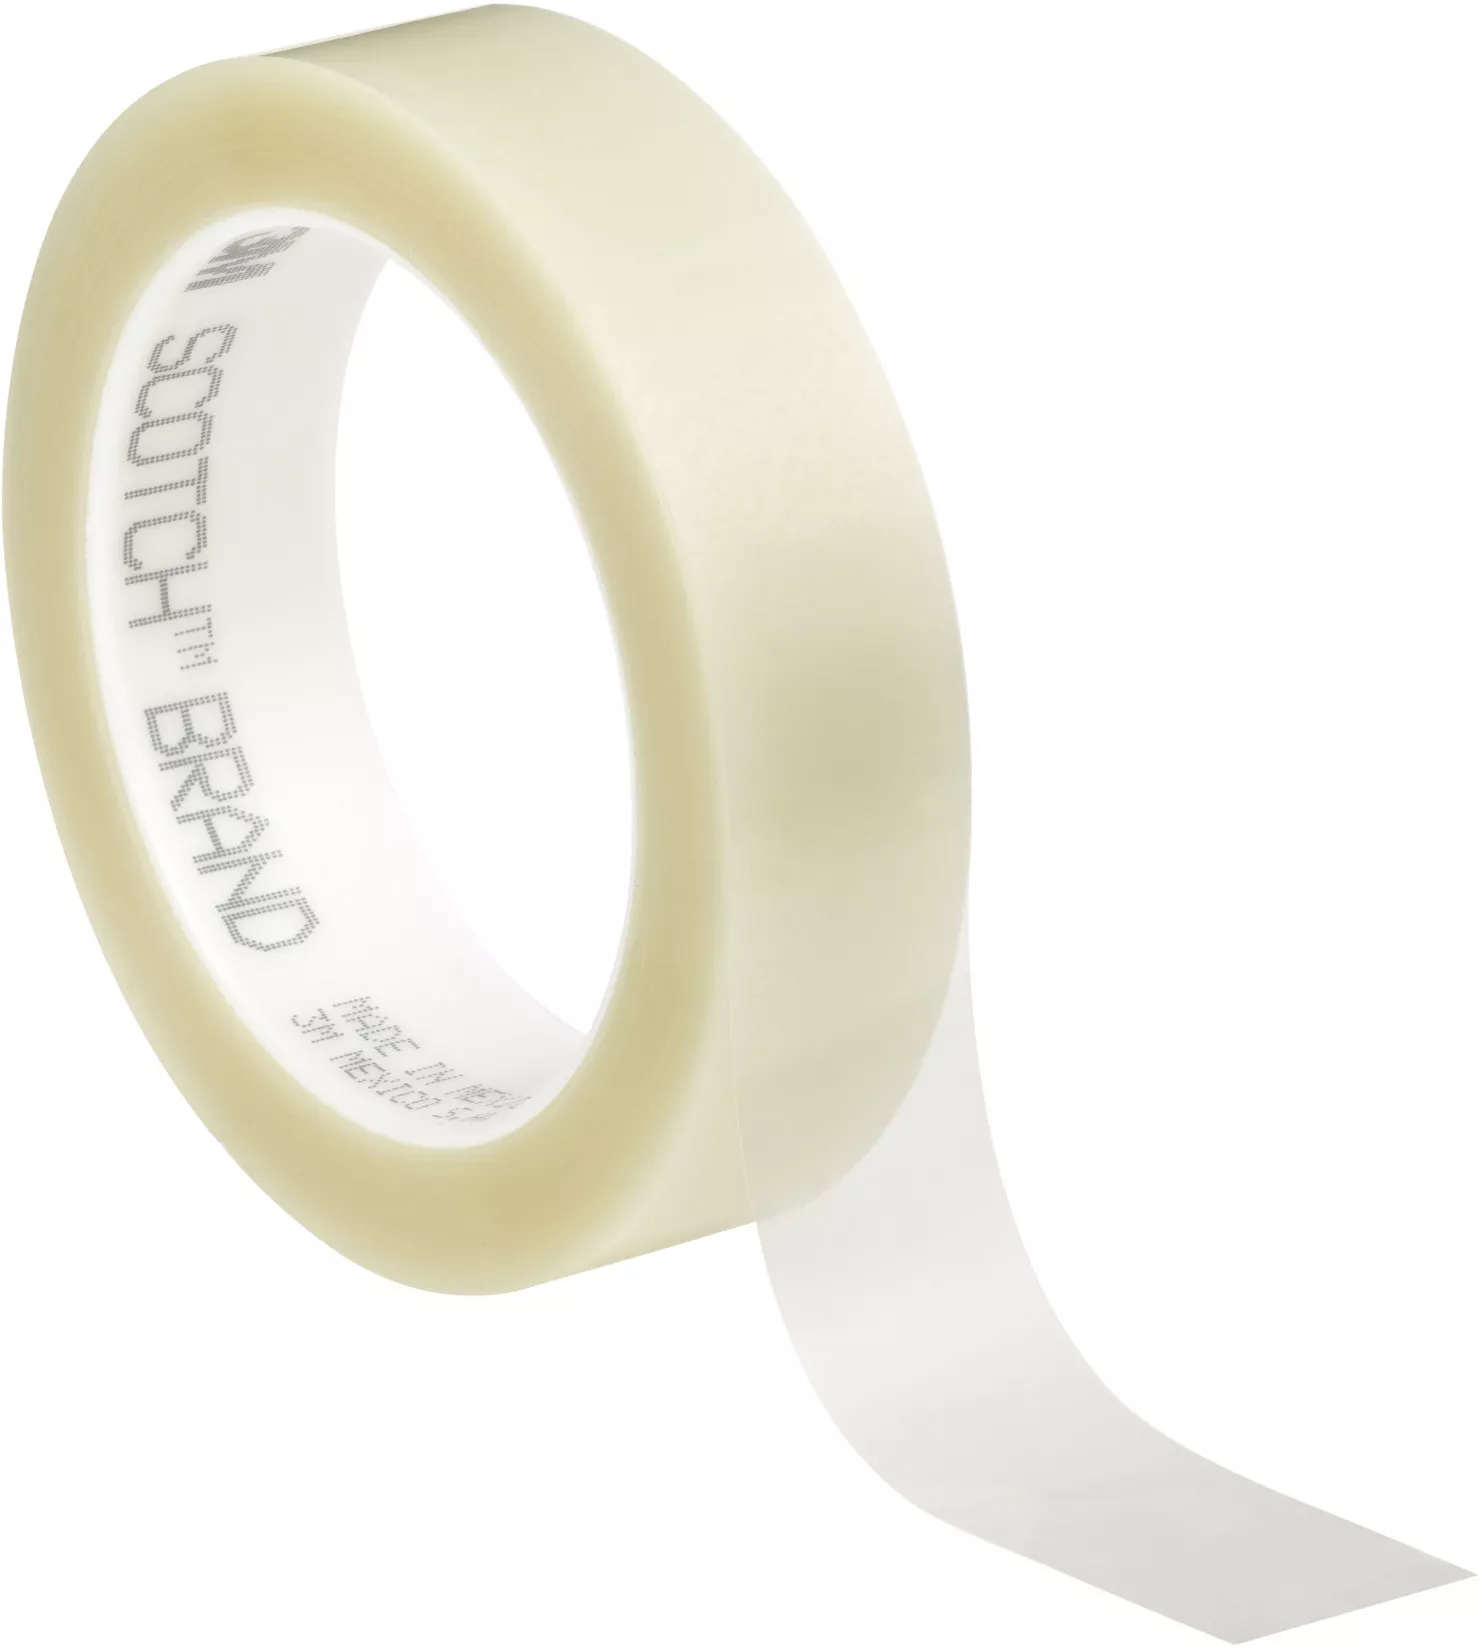 3M™ Polyester Film Tape 853, Transparent, 1/2 in x 72 yd, 2.2 mil, 72
Rolls/Case